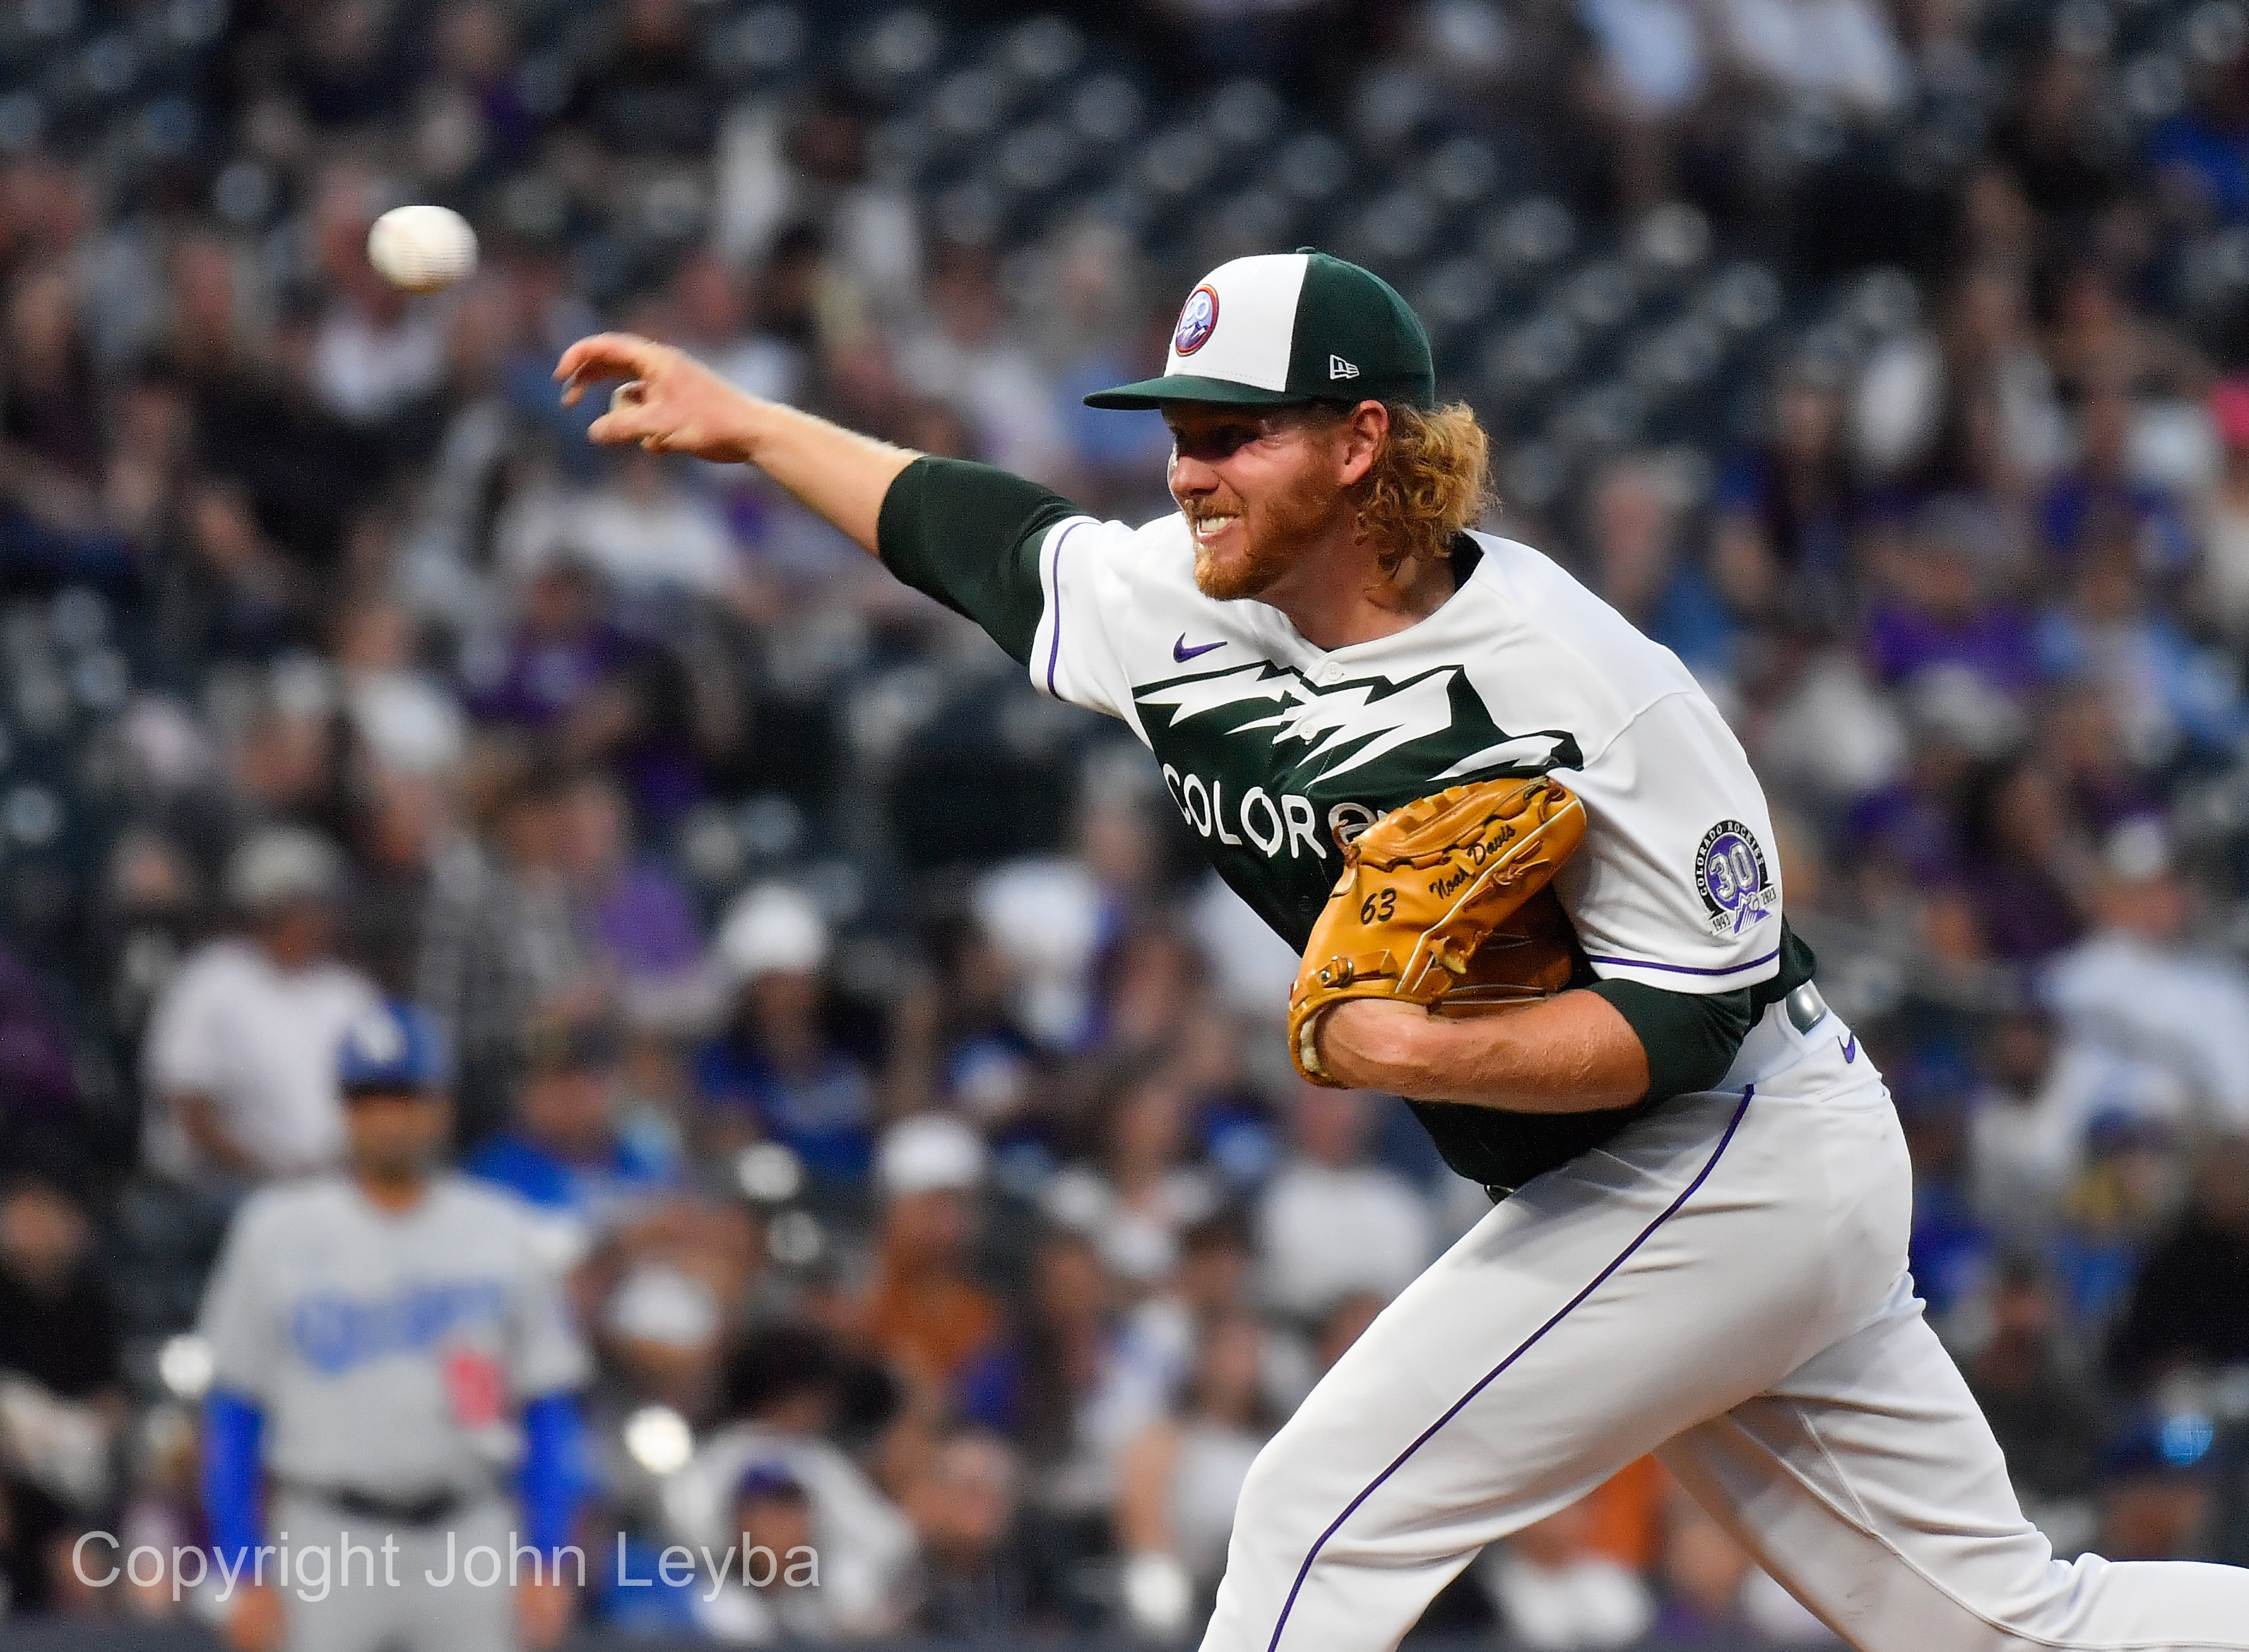 James Outman's offense blasts Dodgers past Rockies, Sports